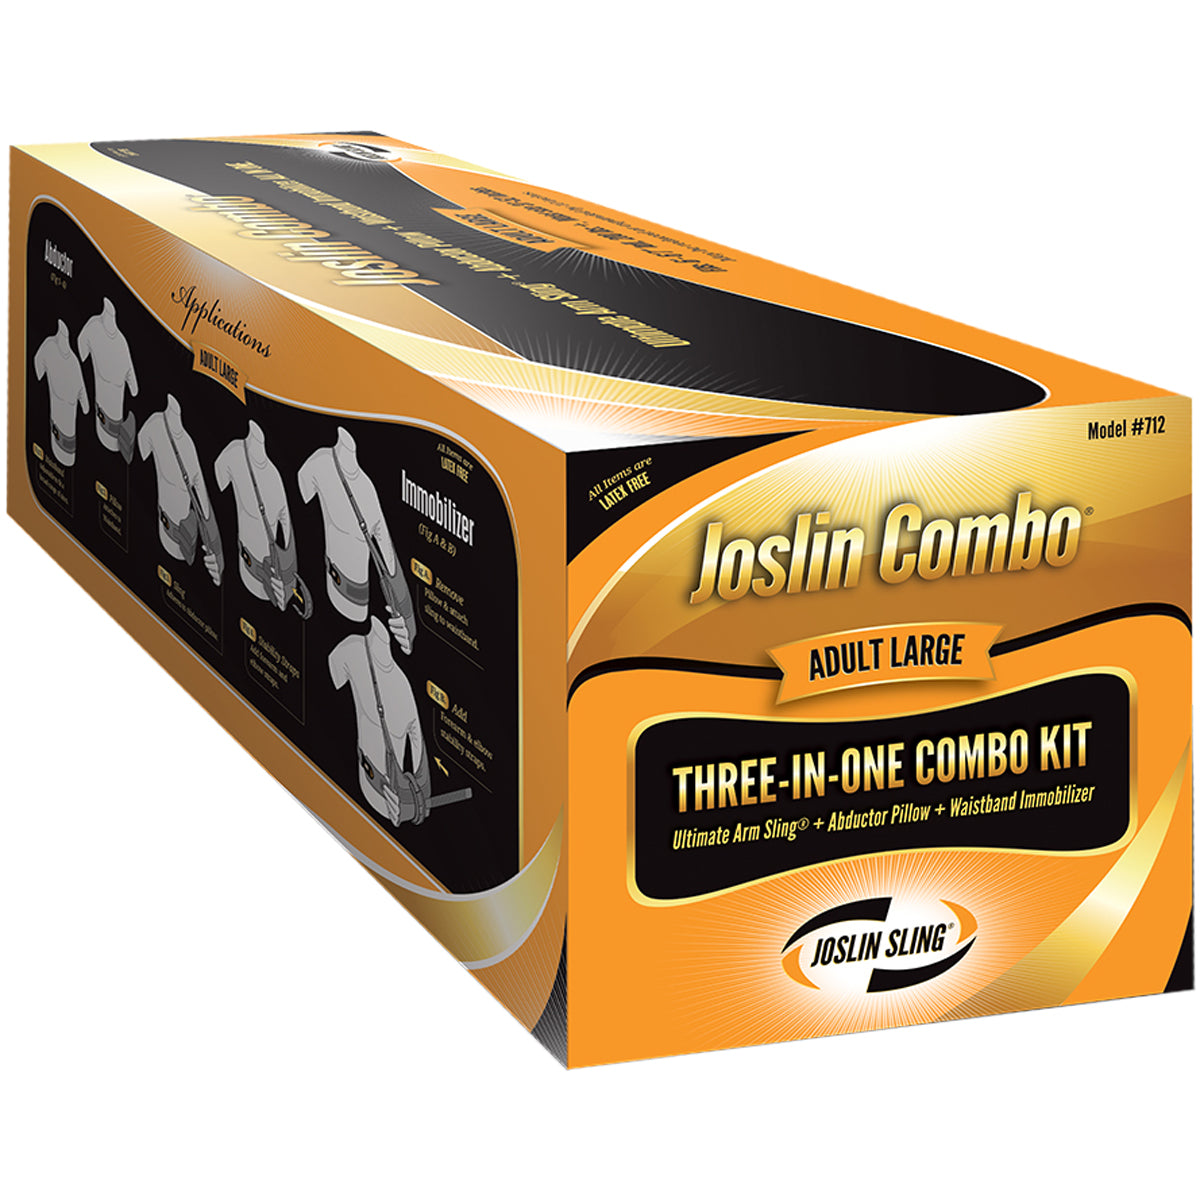 Joslin Combo Kit, Includes: Ultimate Arm Sling, Immobilizer, and Abductor Pillow Joslin